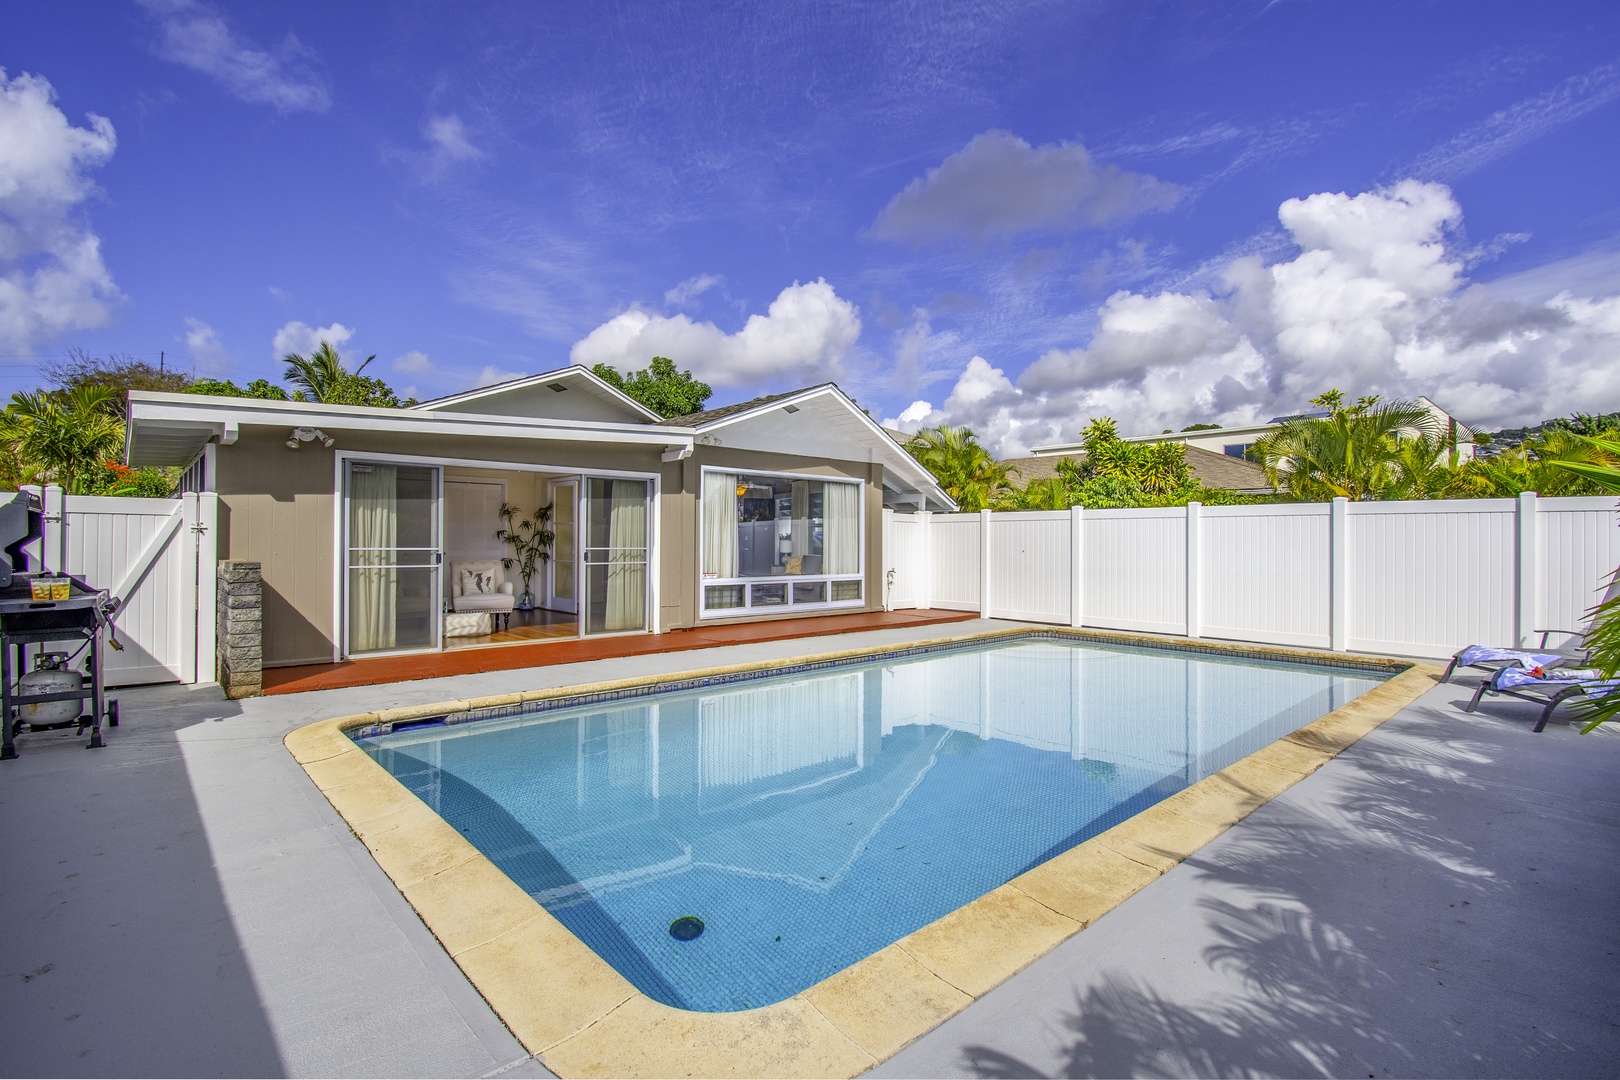 Honolulu Vacation Rentals, Kahala Cottage - Enjoy a relaxing dip in the private pool!